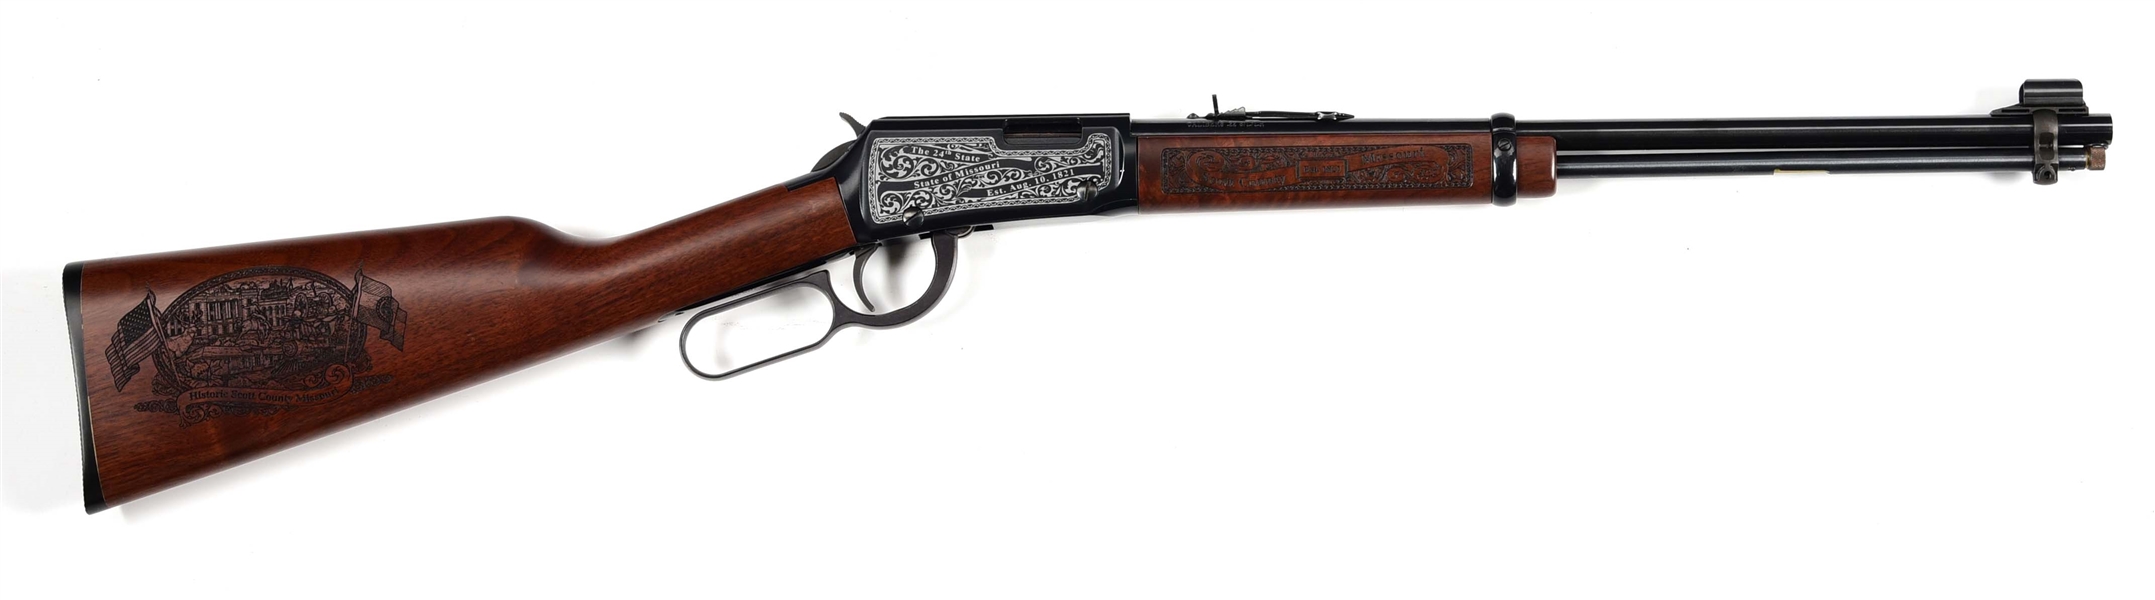 (M) HENRY COMMEMORATIVE LEVER ACTION RIFLE. 